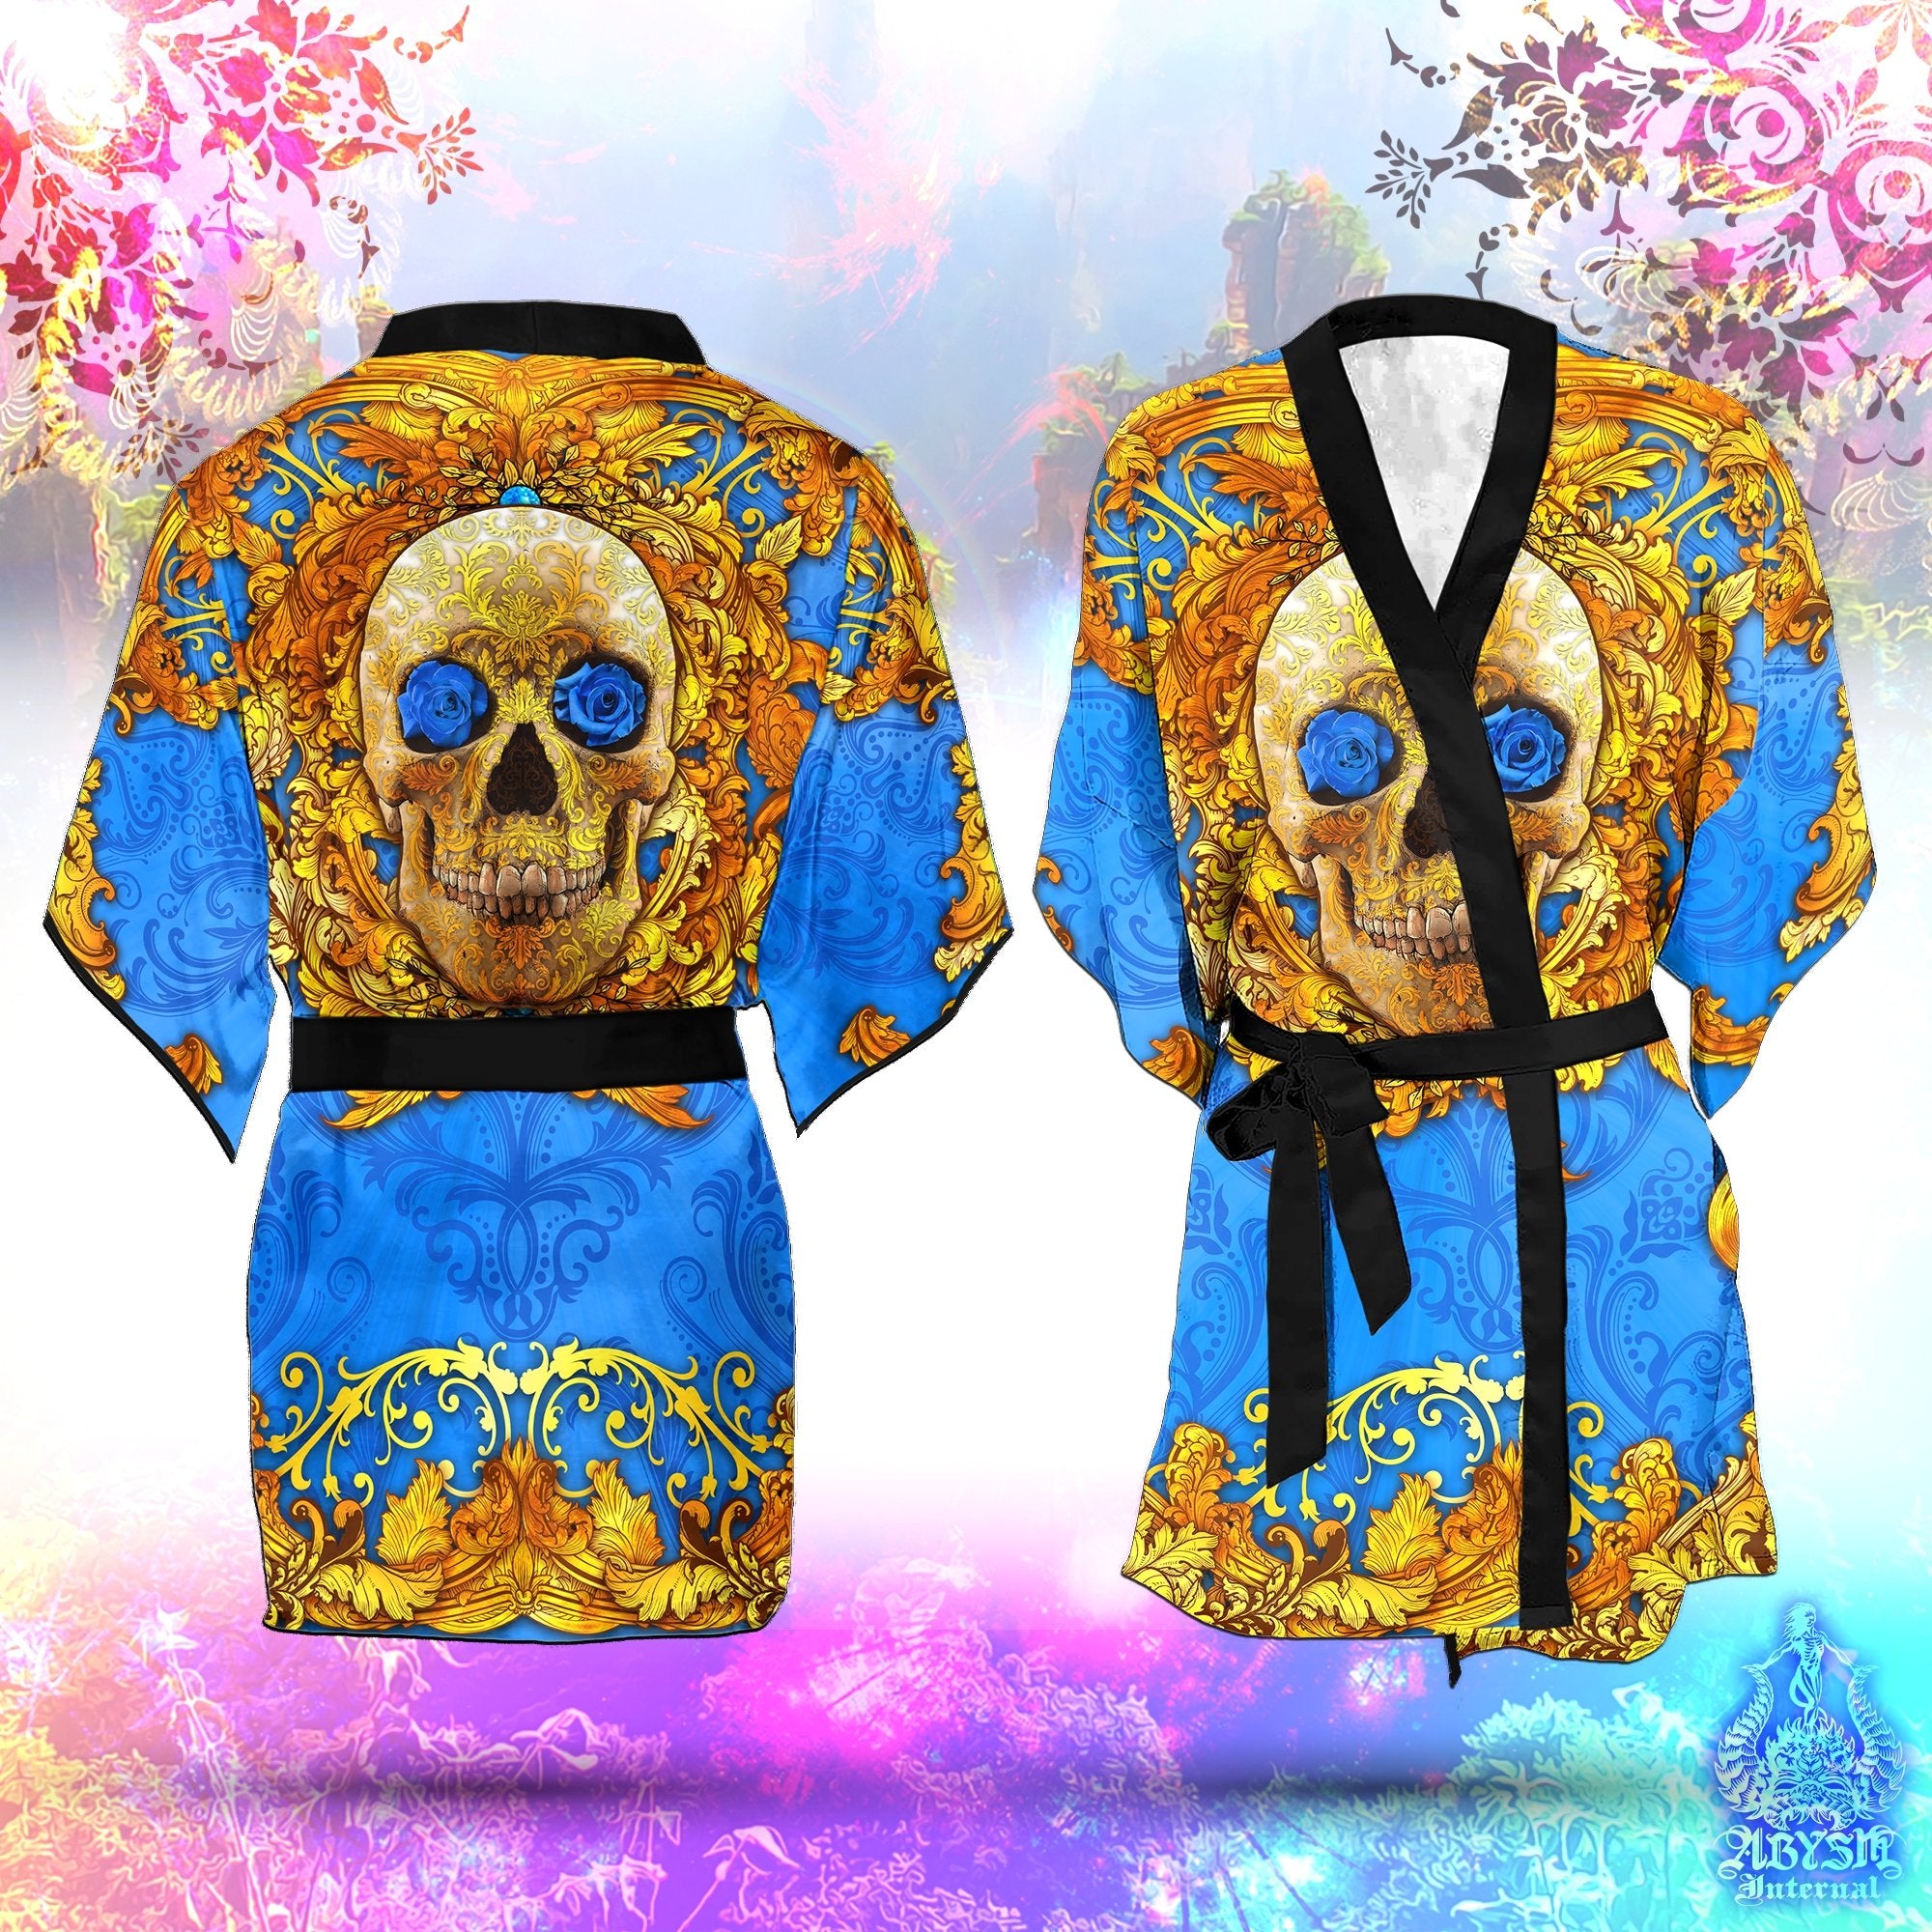 Skull Cover Up, Beach Outfit, Party Kimono, Summer Festival Robe, Indie and Alternative Clothing, Unisex - Cyan Gold - Abysm Internal